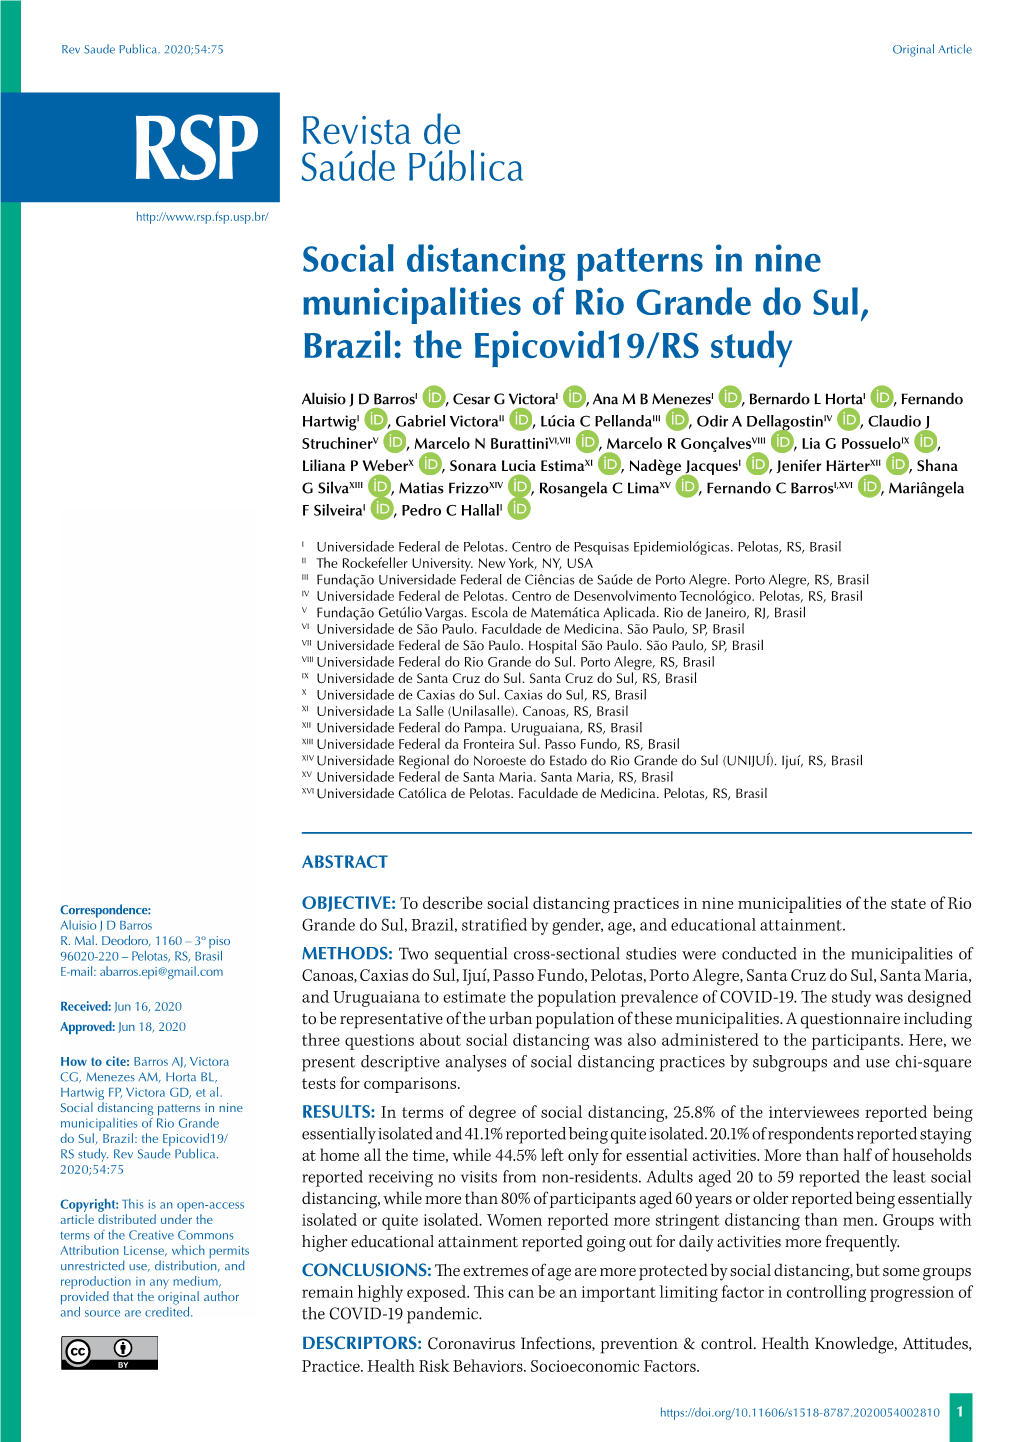 Social Distancing Patterns in Nine Municipalities of Rio Grande Do Sul, Brazil: the Epicovid19/RS Study